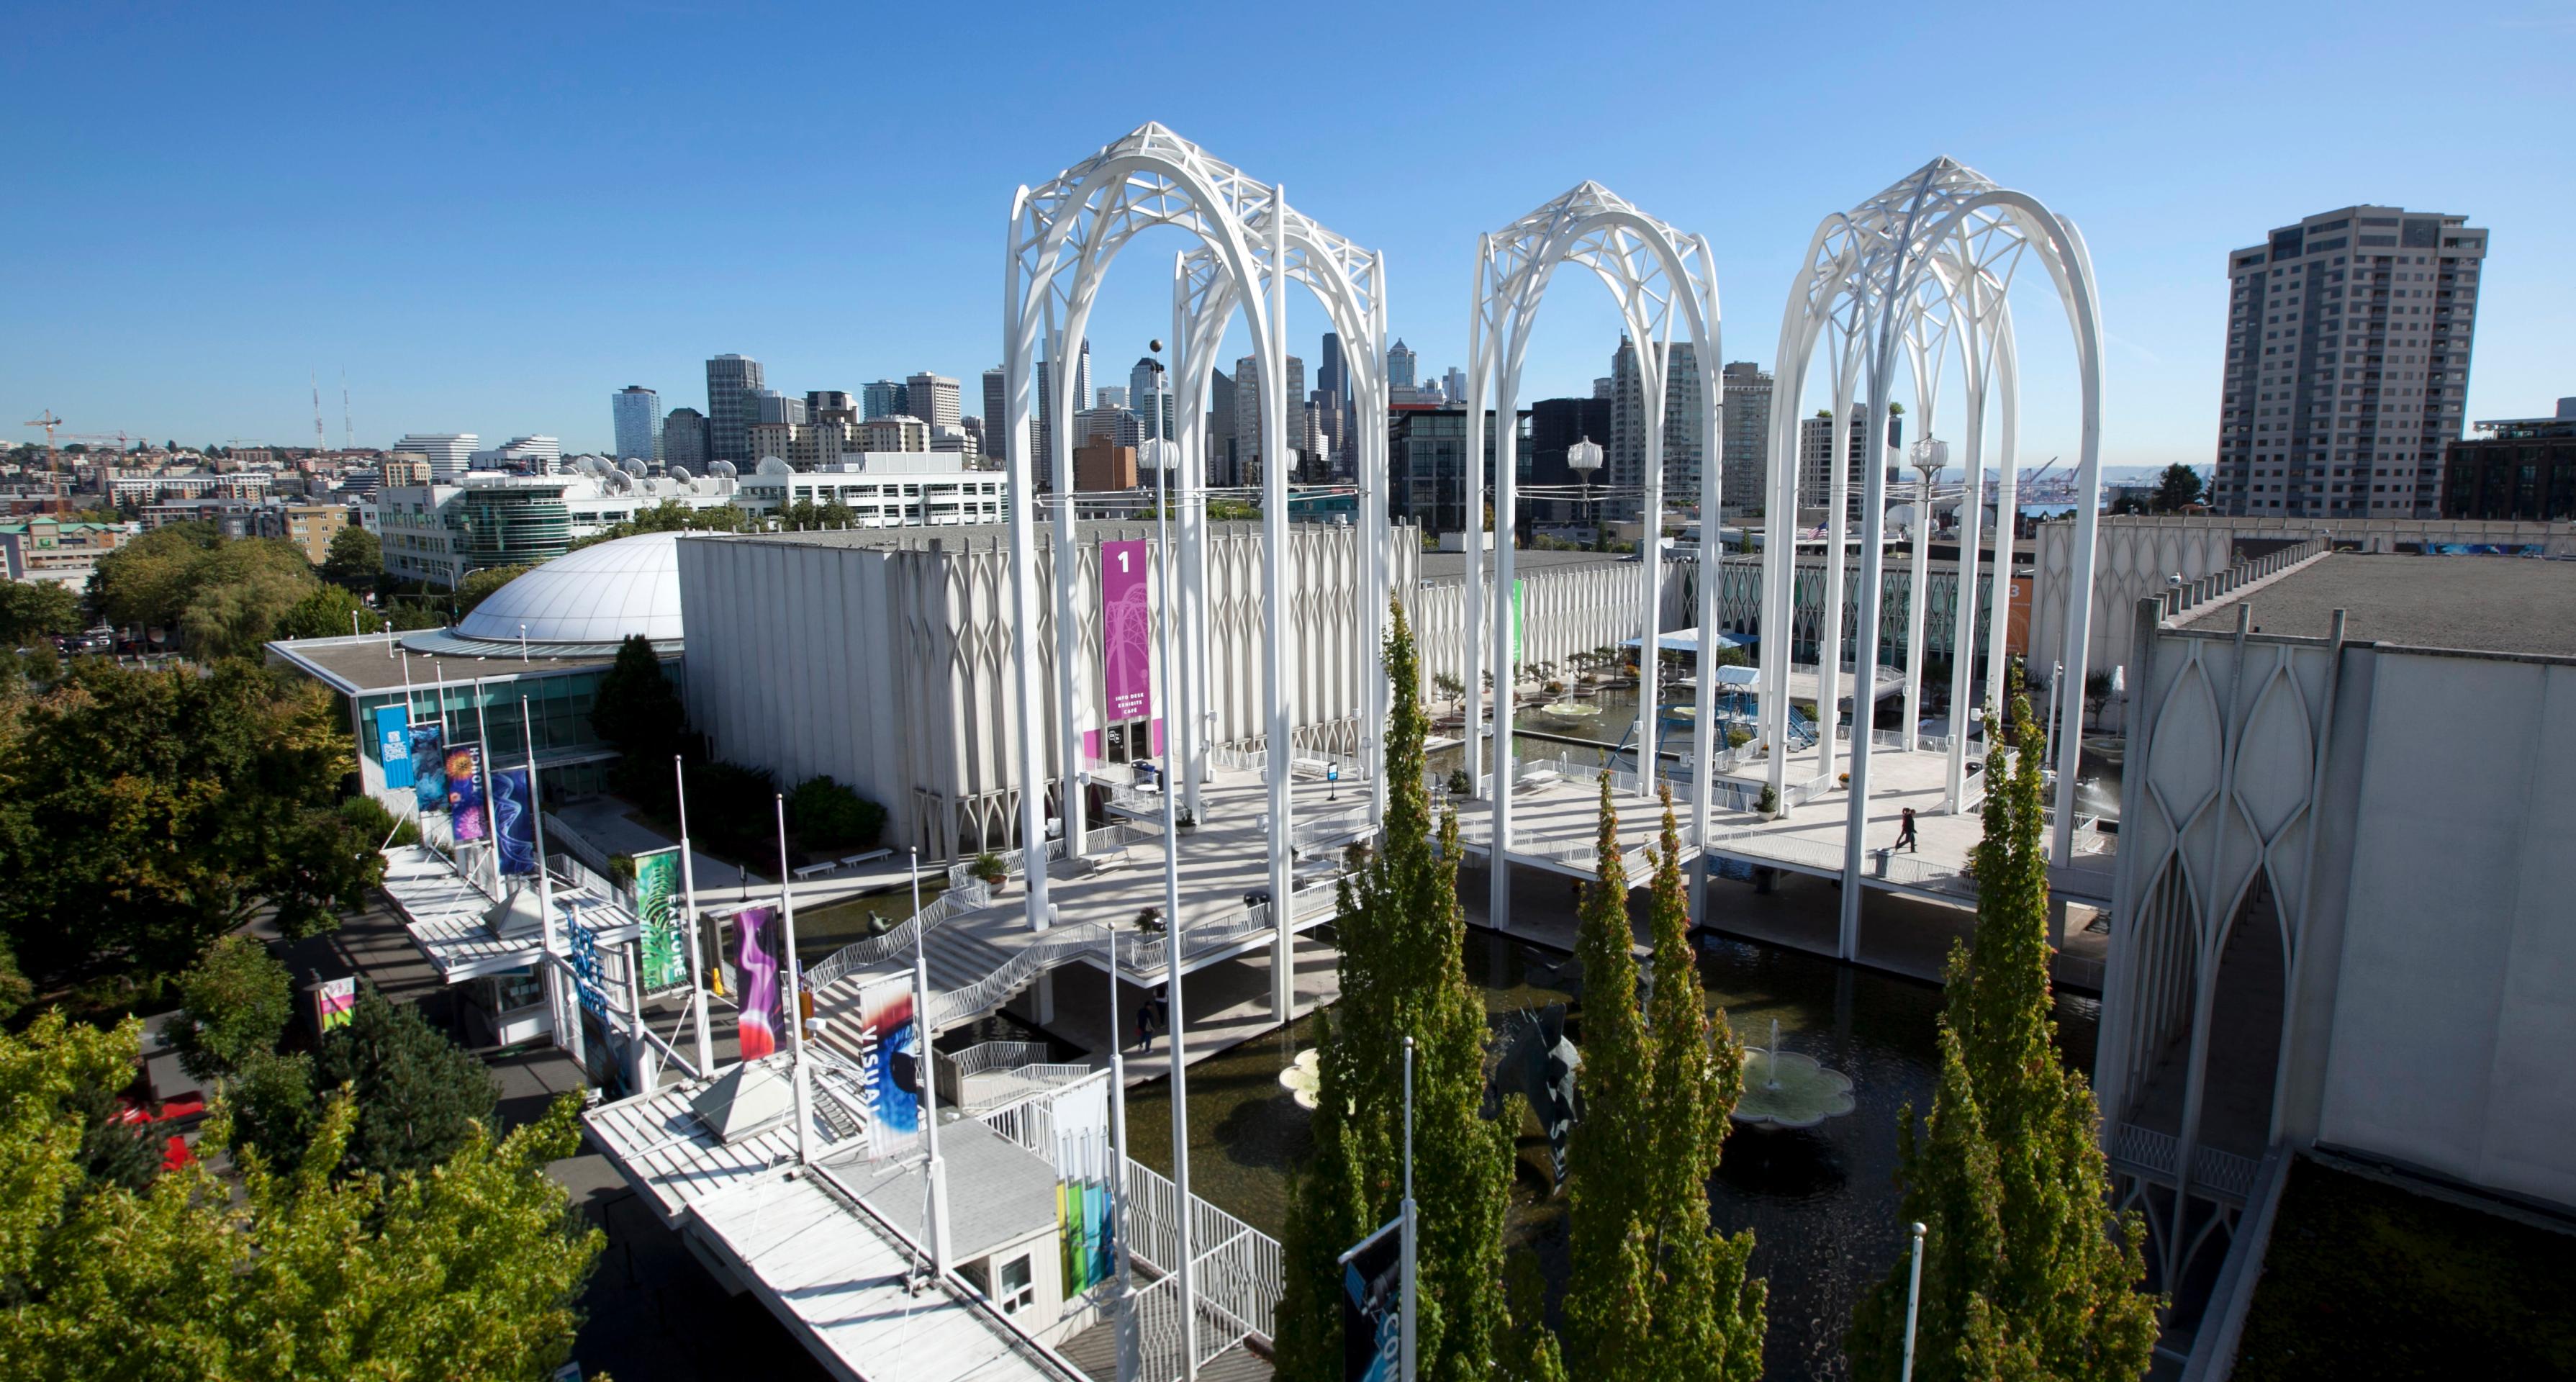 Tickets to the Pacific Science Center – Seattle’s science museum